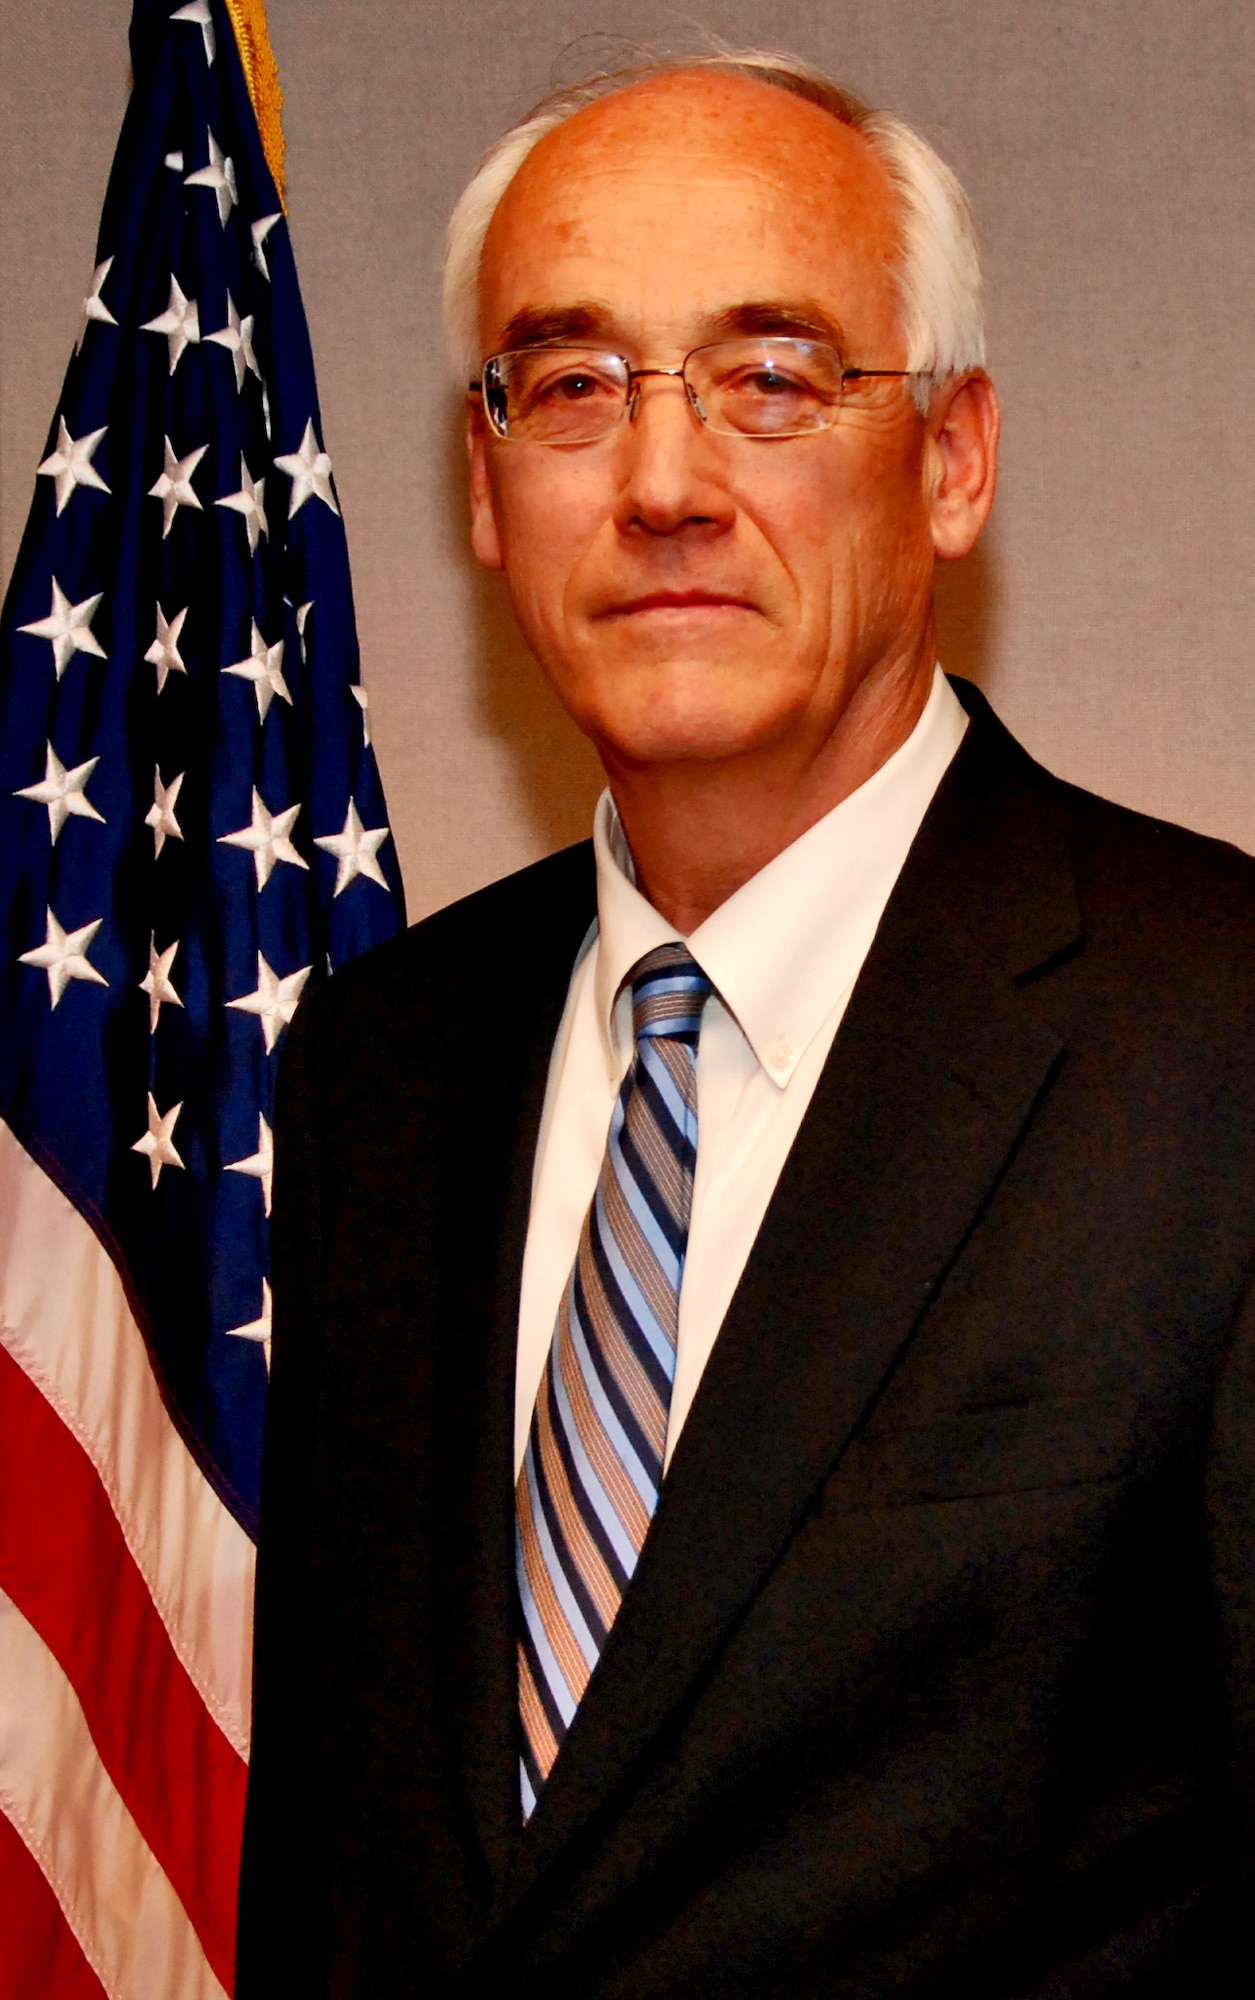 Dr. Kent L. Miller (Air Force Office of Scientific Research) is a program manager in the Physics and Electronics Directorate, leading a basic research program in fundamental physics relevant to Space Situational Awareness.  He is an internationally known authority in lower thermospheric dynamics and planetary ionospheres.  